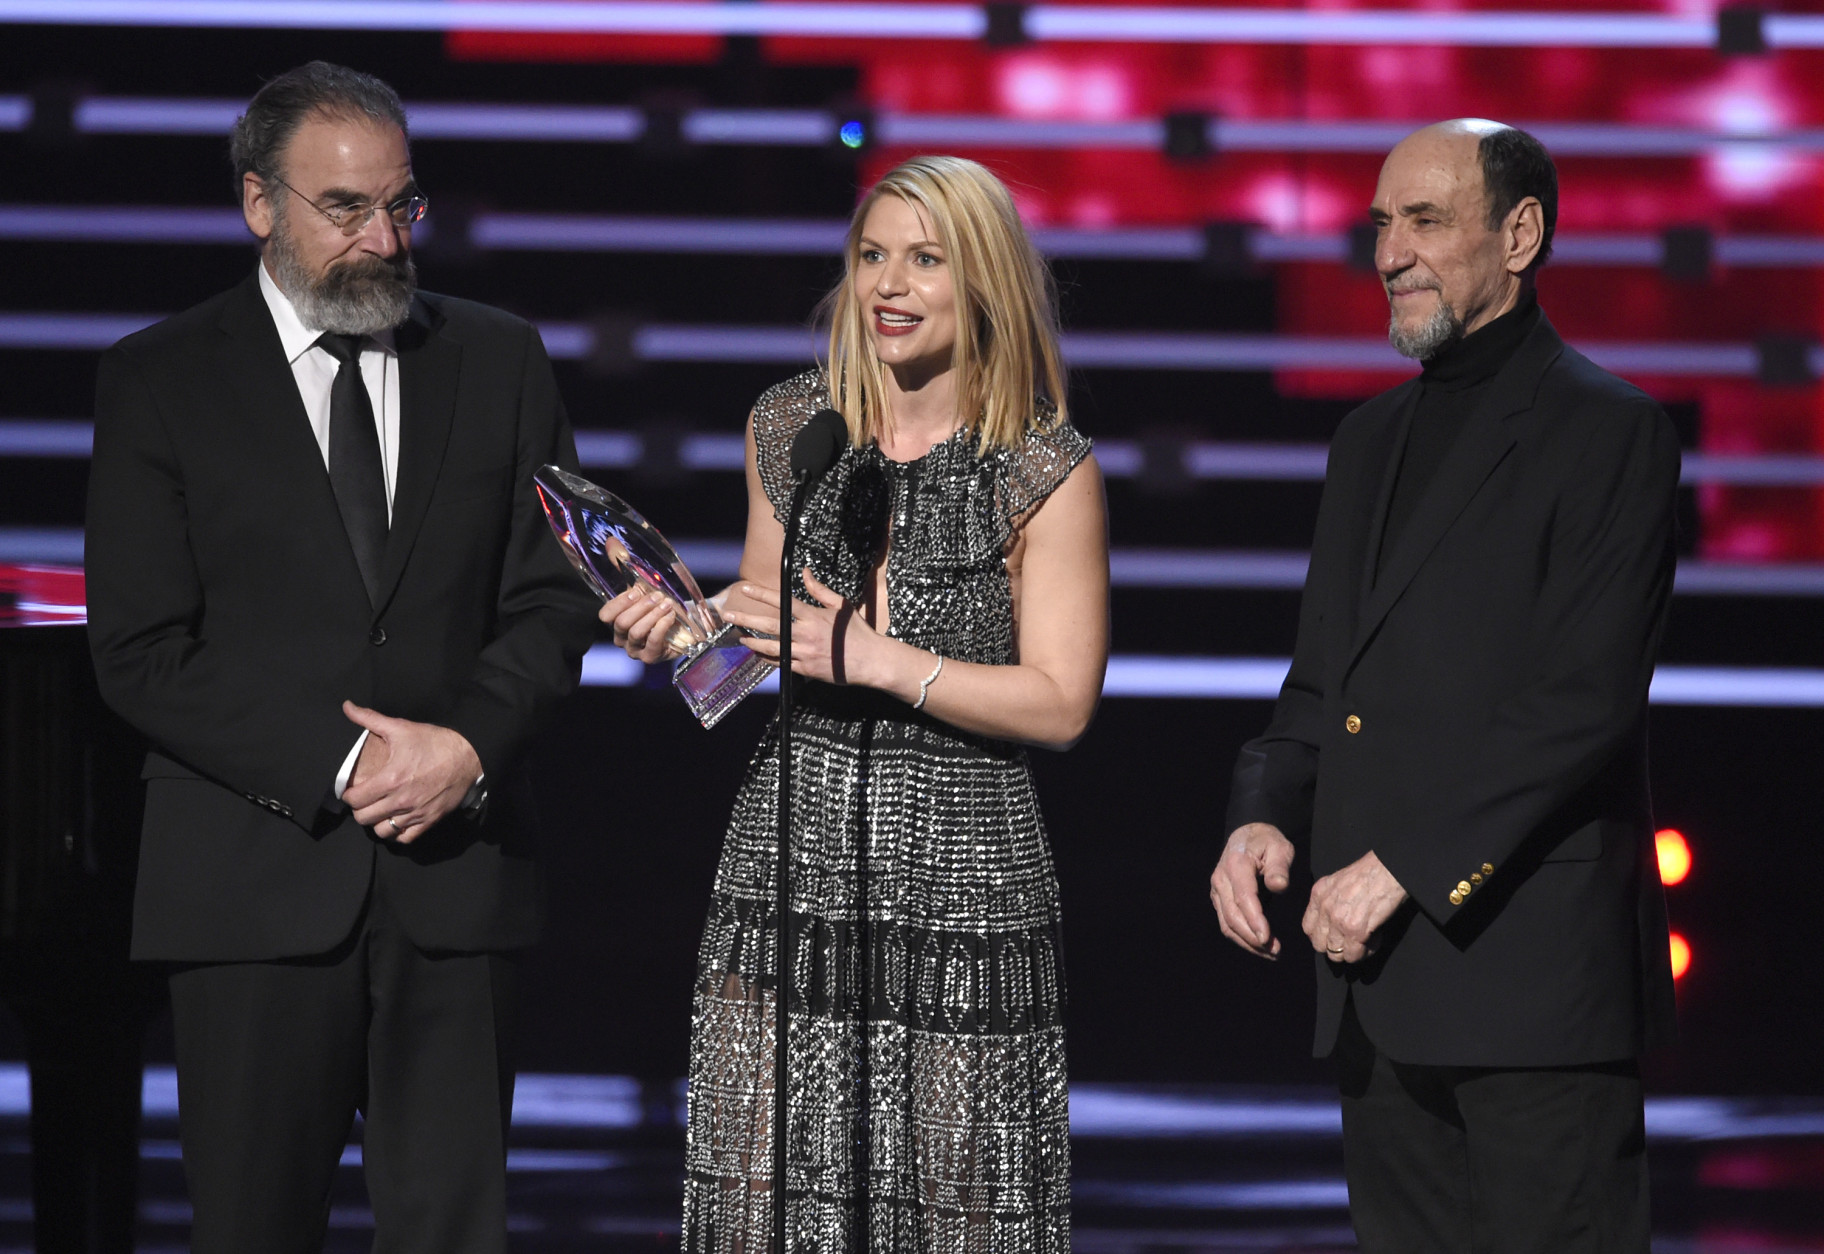 Mandy Patinkin, and from left, Claire Danes, and F. Murray Abraham accept the award for favorite premium cable tv show for Homeland at the People's Choice Awards at the Microsoft Theater on Wednesday, Jan. 6, 2016, in Los Angeles. (Photo by Chris Pizzello/Invision/AP)